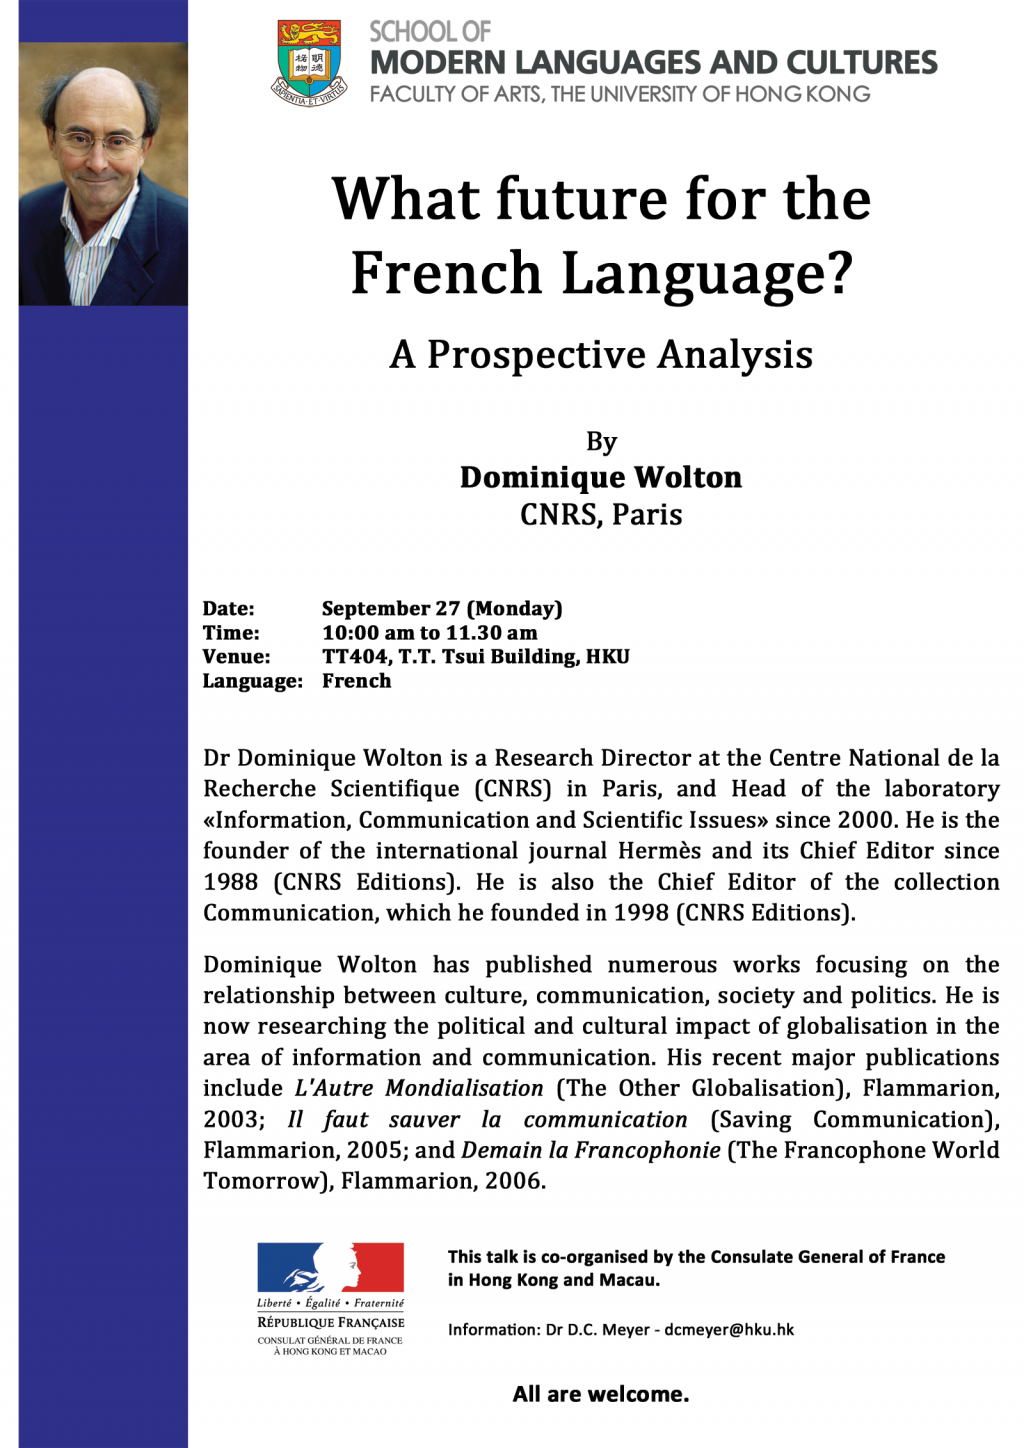 What future for the French Language? A Prospective Analysis